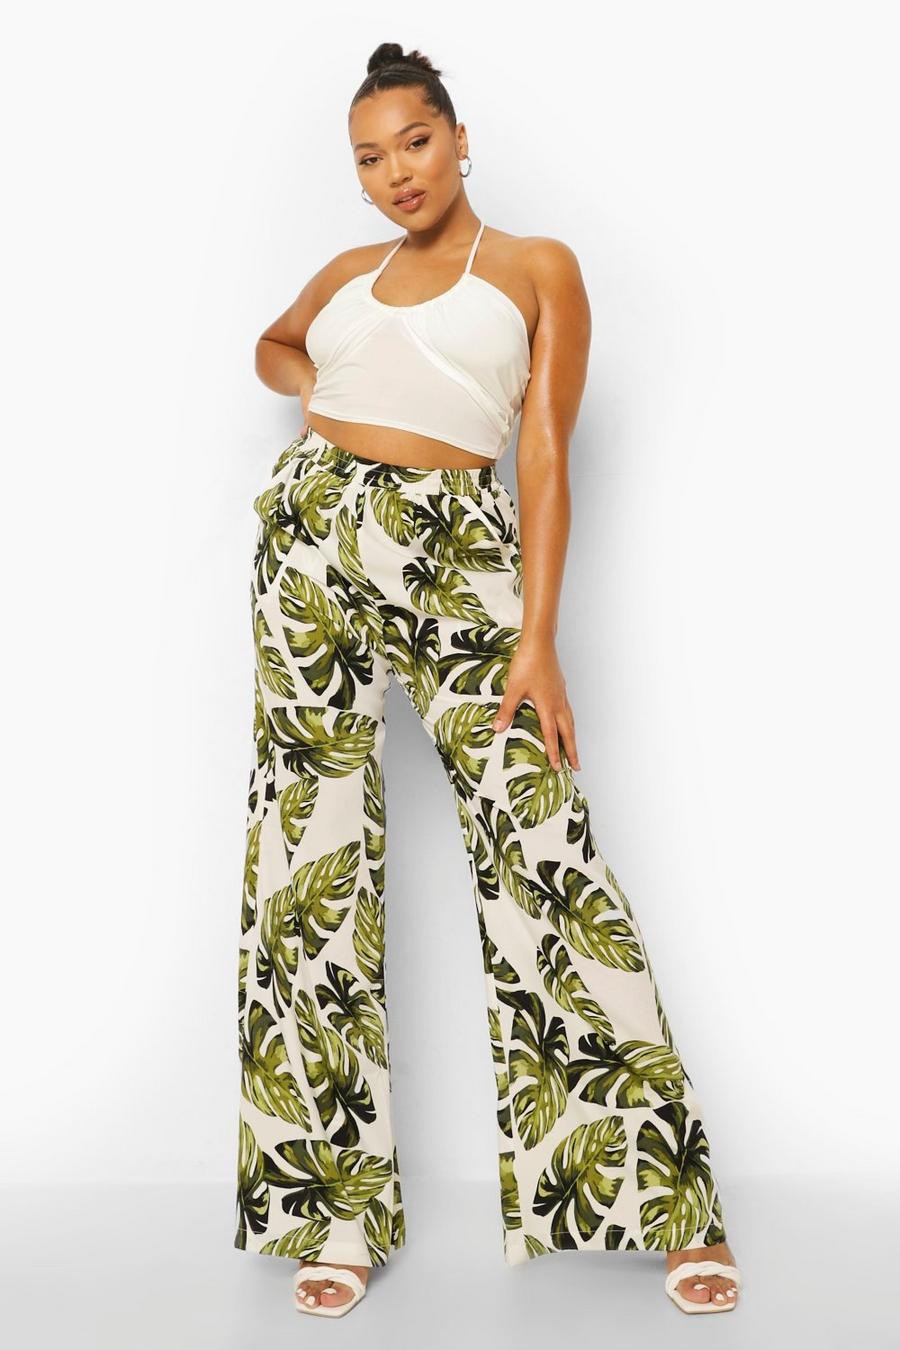 Candid Styles Womens Ladies Plus Size Wide Leg Palazzo Printed Baggy Flared Skater Trouser Pants 12-26 